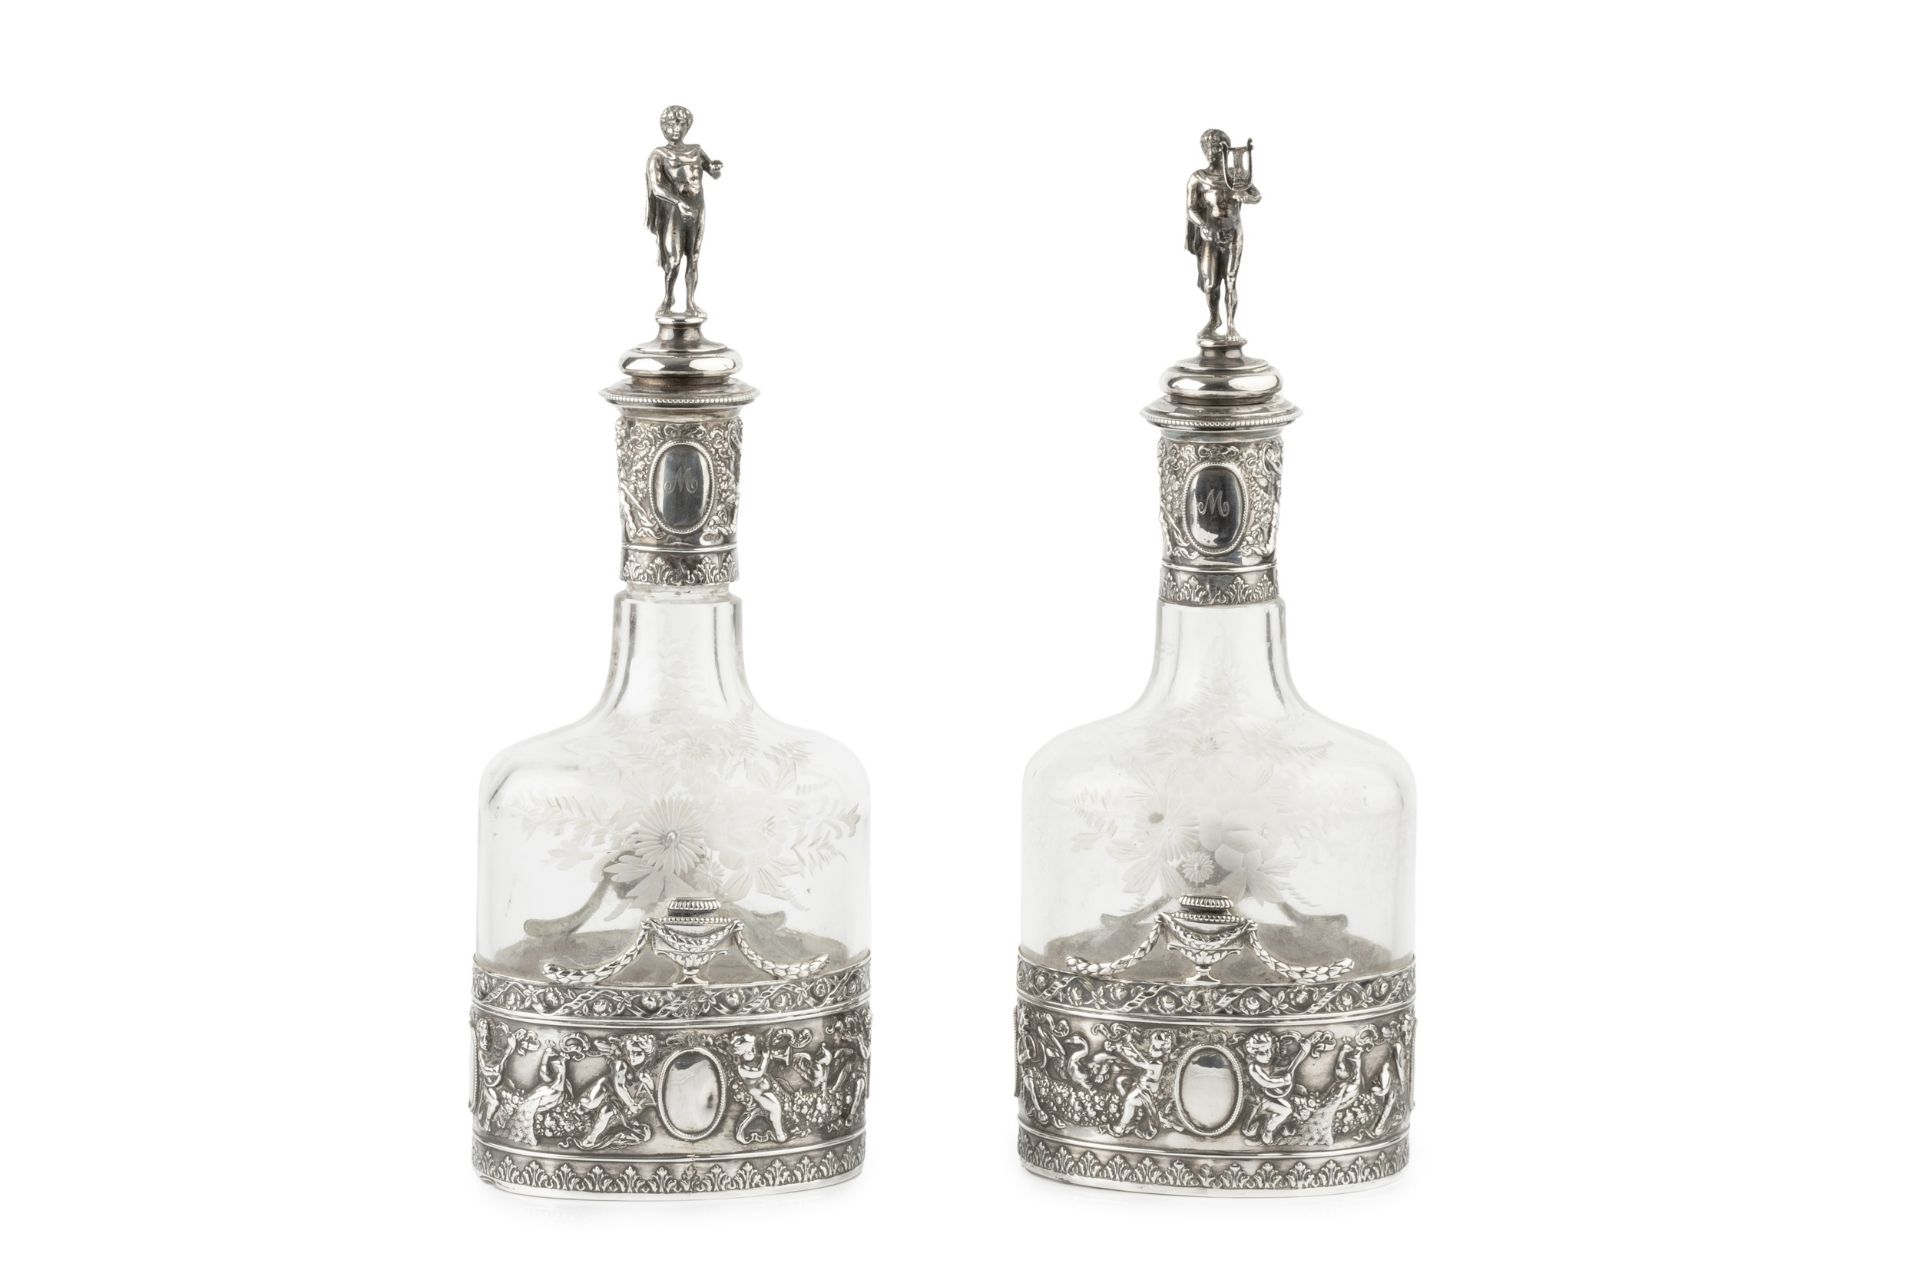 A pair of early 20th century Hanau silver mounted decanters and stoppers, repoussé decorated with